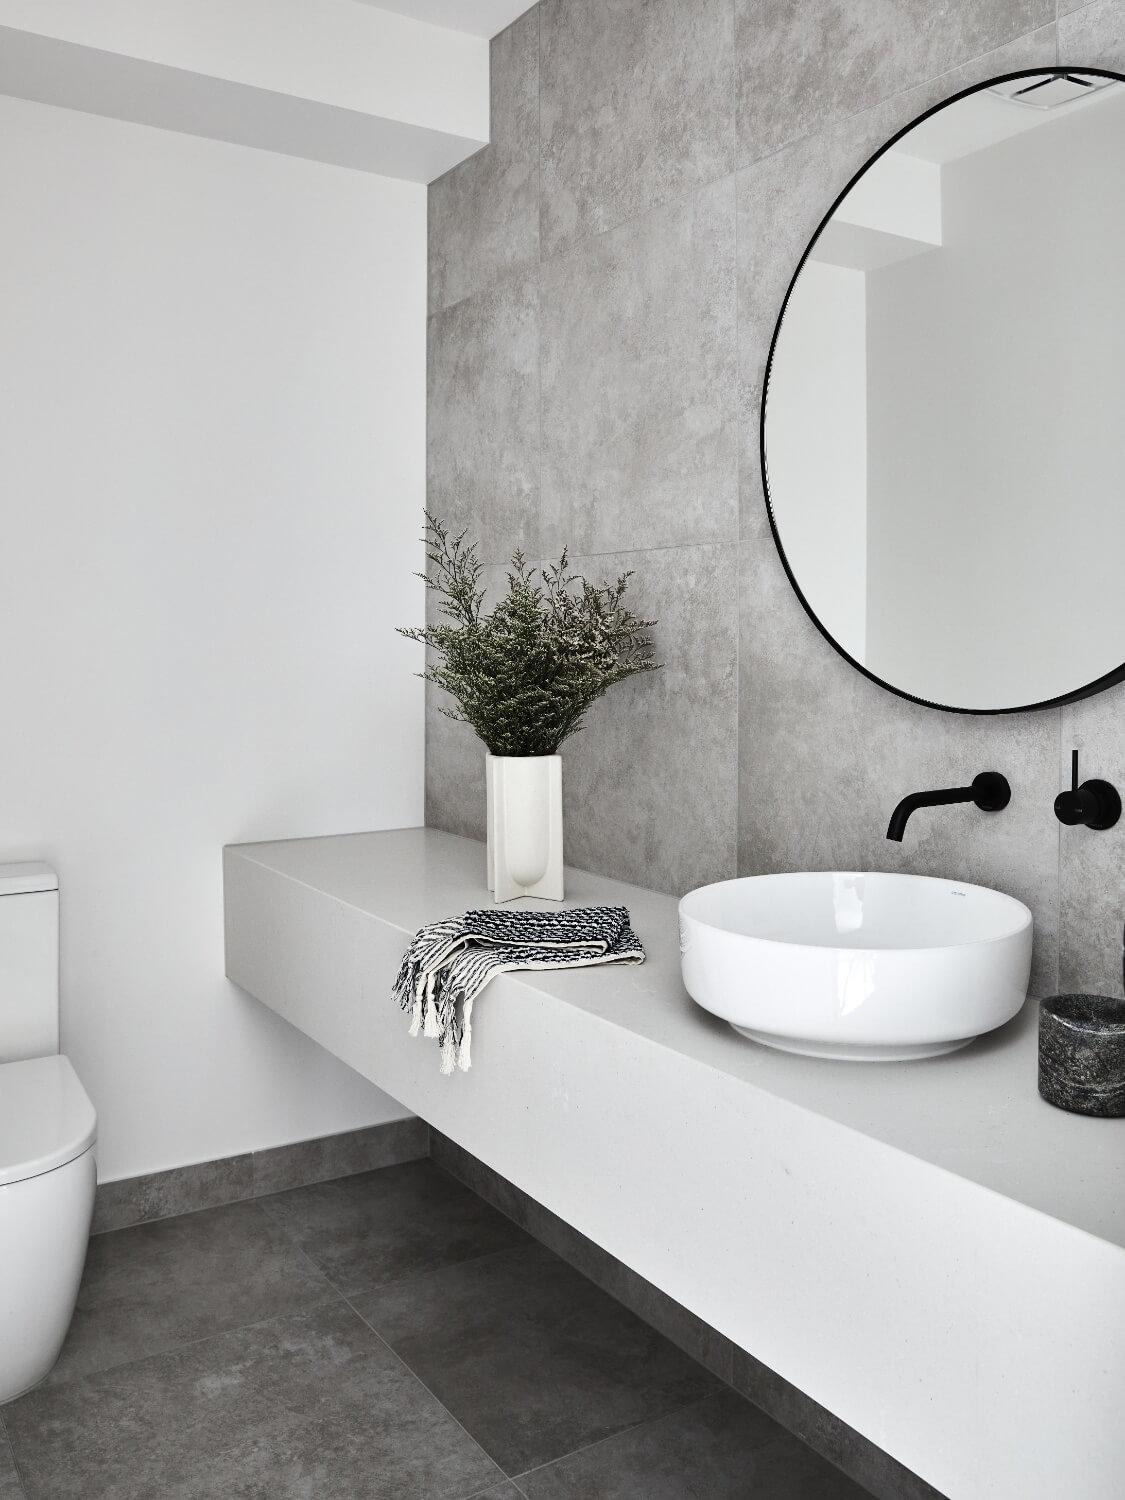 White Stone Vanity Adds Brightness To Muted Grey Tiling In Bathroom